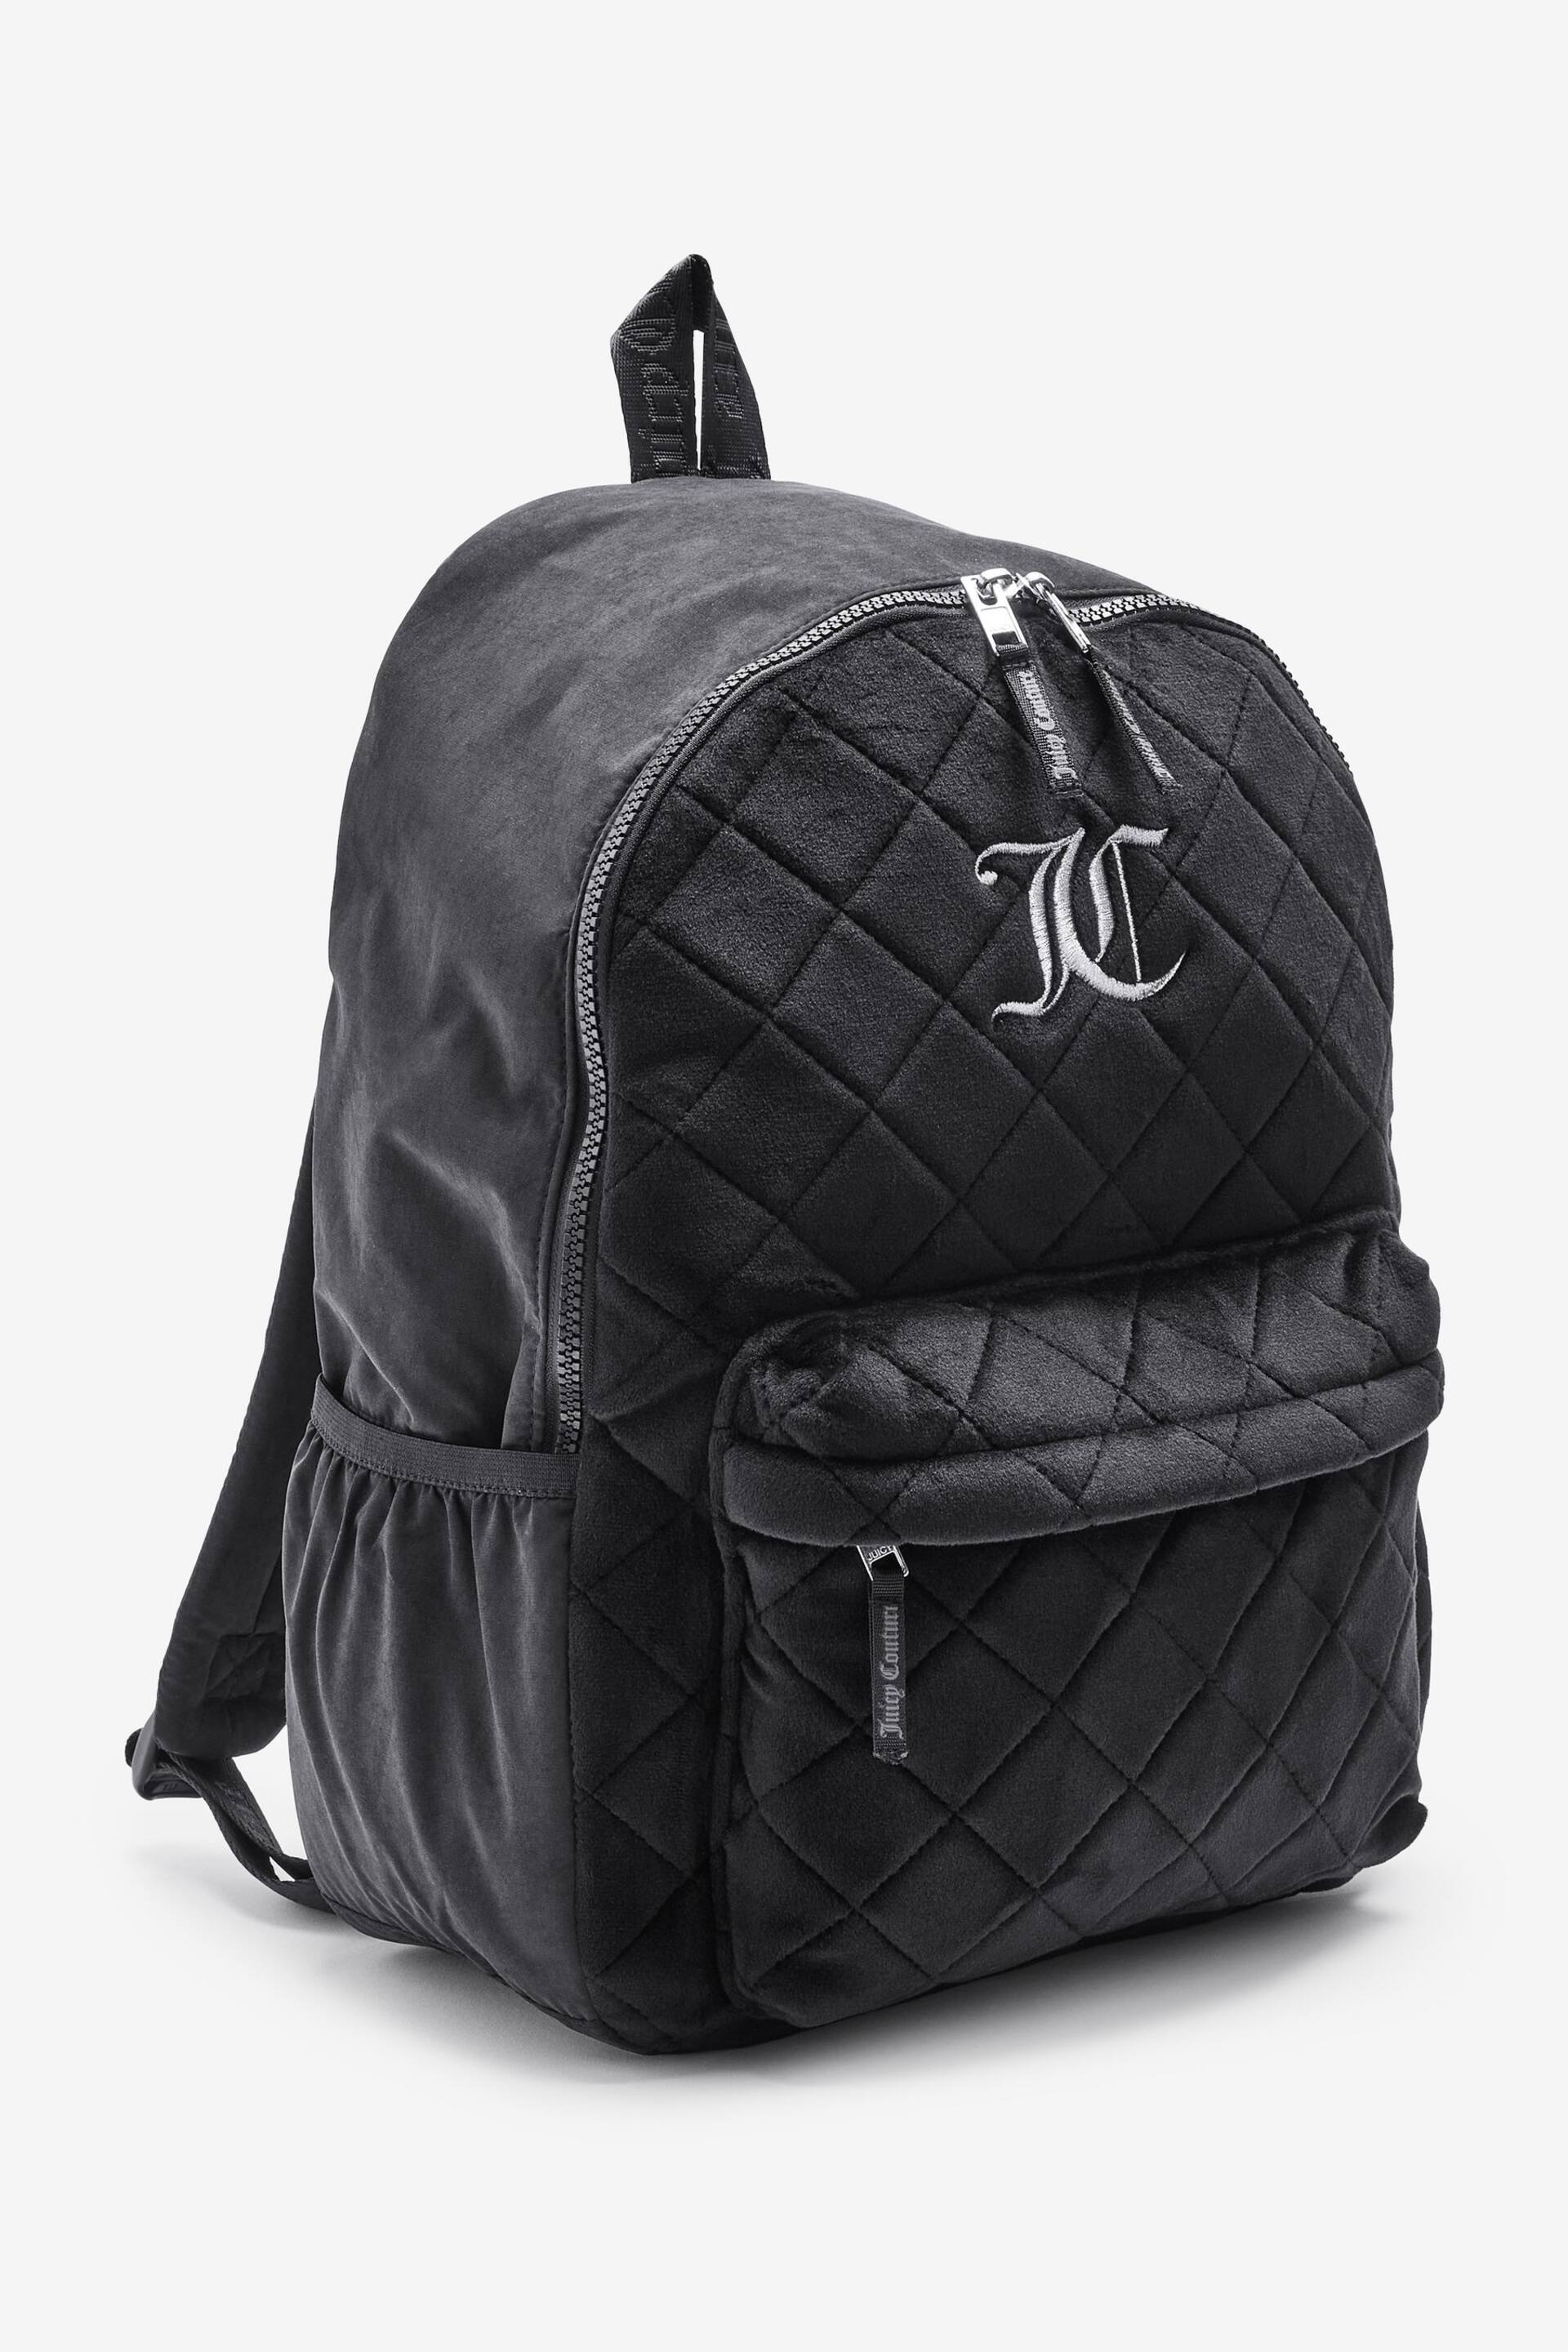 Juicy Couture Girls Quilted Velour Black Backpack - Image 2 of 10